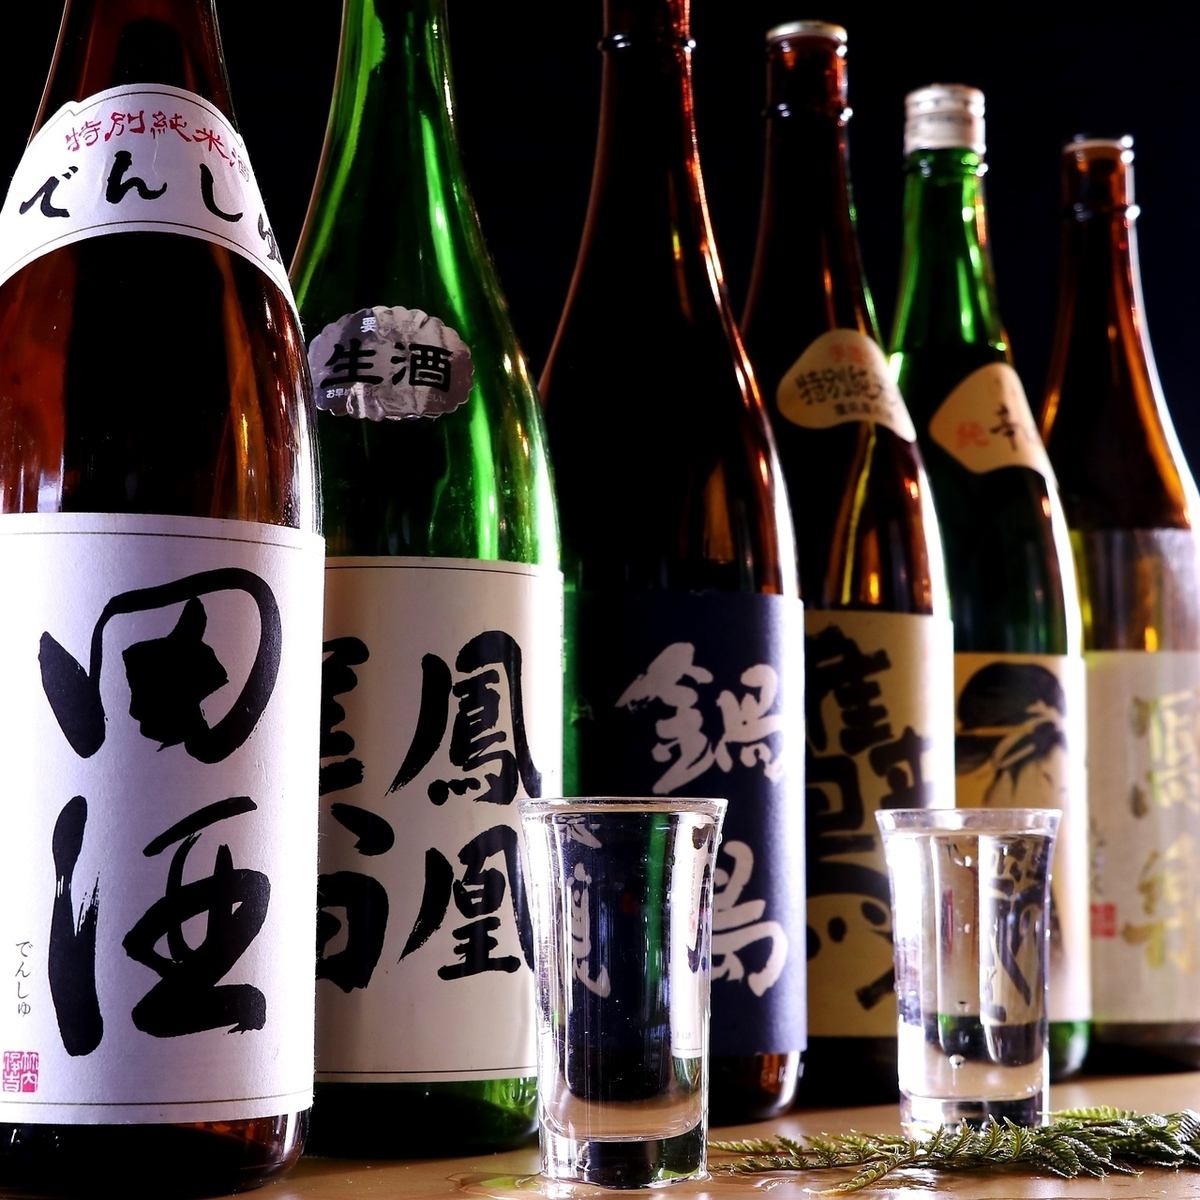 We also offer an all-you-can-drink plan for popular premium sake such as Densake and Sharaku.